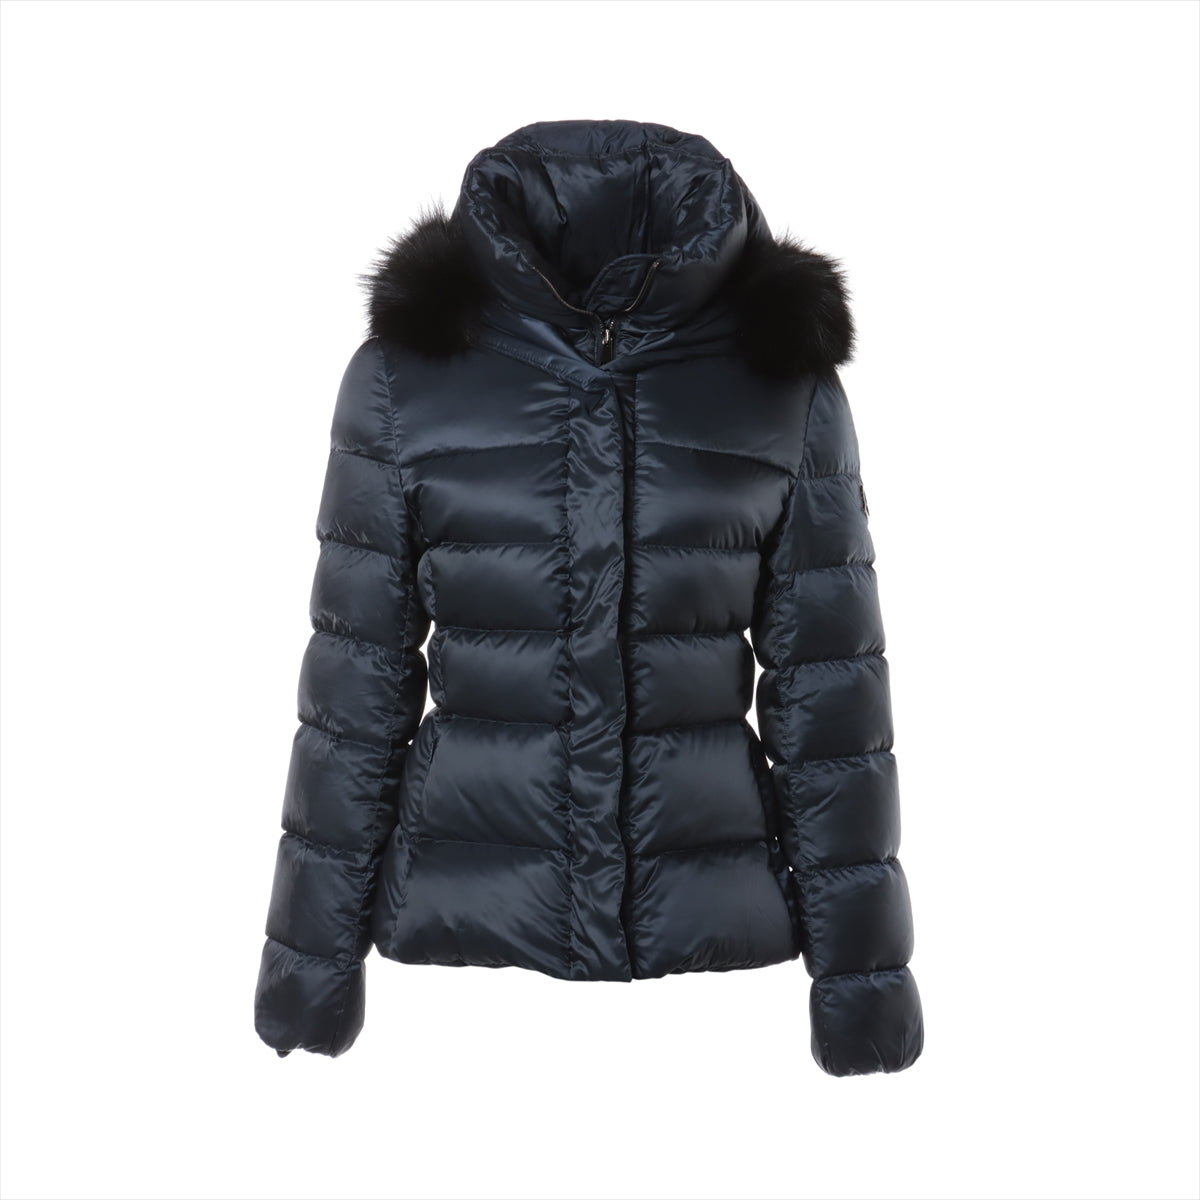 Moncler Outerwear｜Page 8ALLU UK｜The Home of Pre-Loved Luxury Fashion